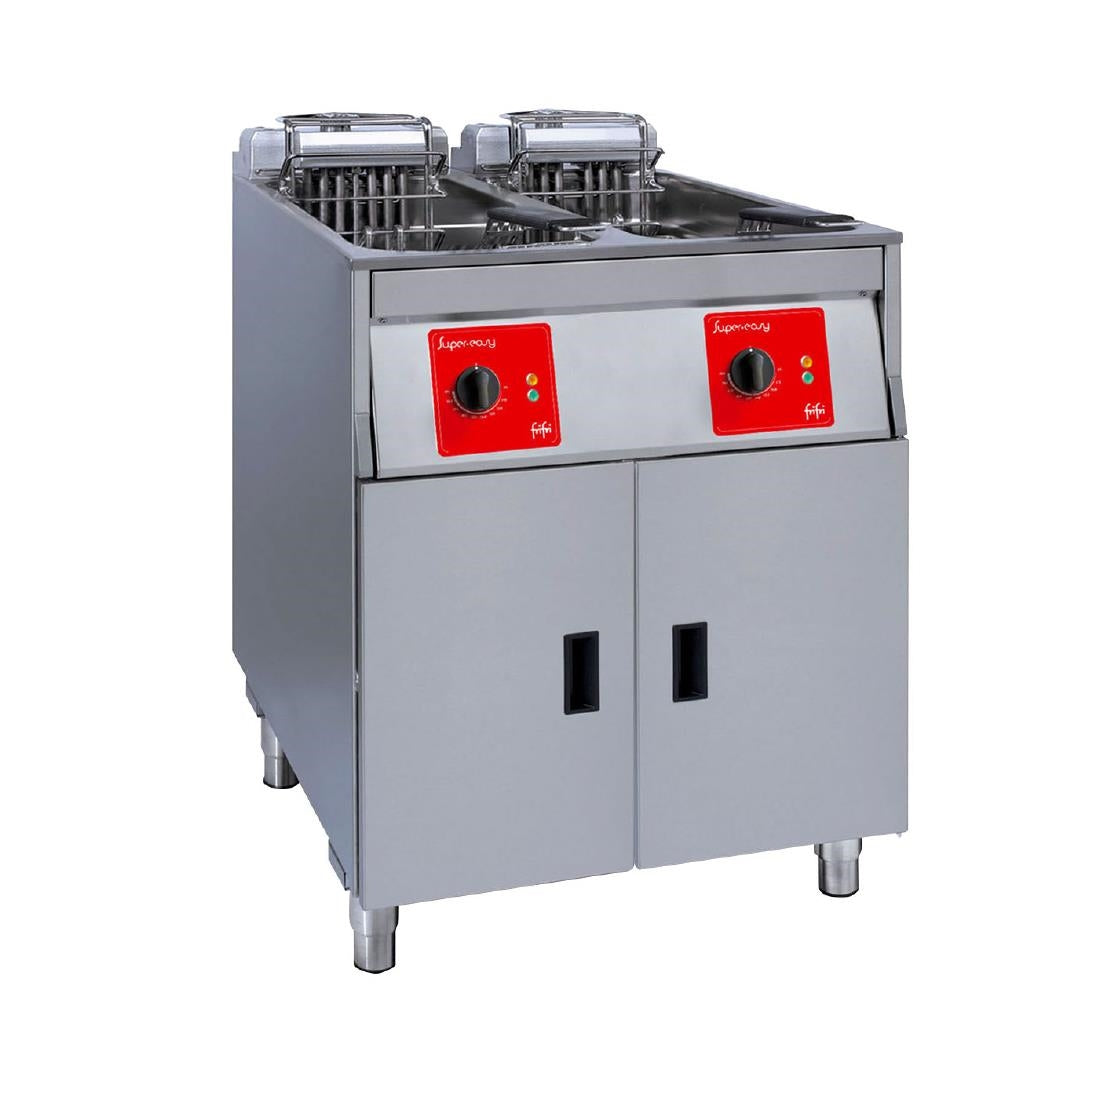 HS072-3PH FriFri Super Easy 622 Electric Free-standing Fryer Twin Tank Twin Baskets without Filtration 2x11.4kW Three Phase